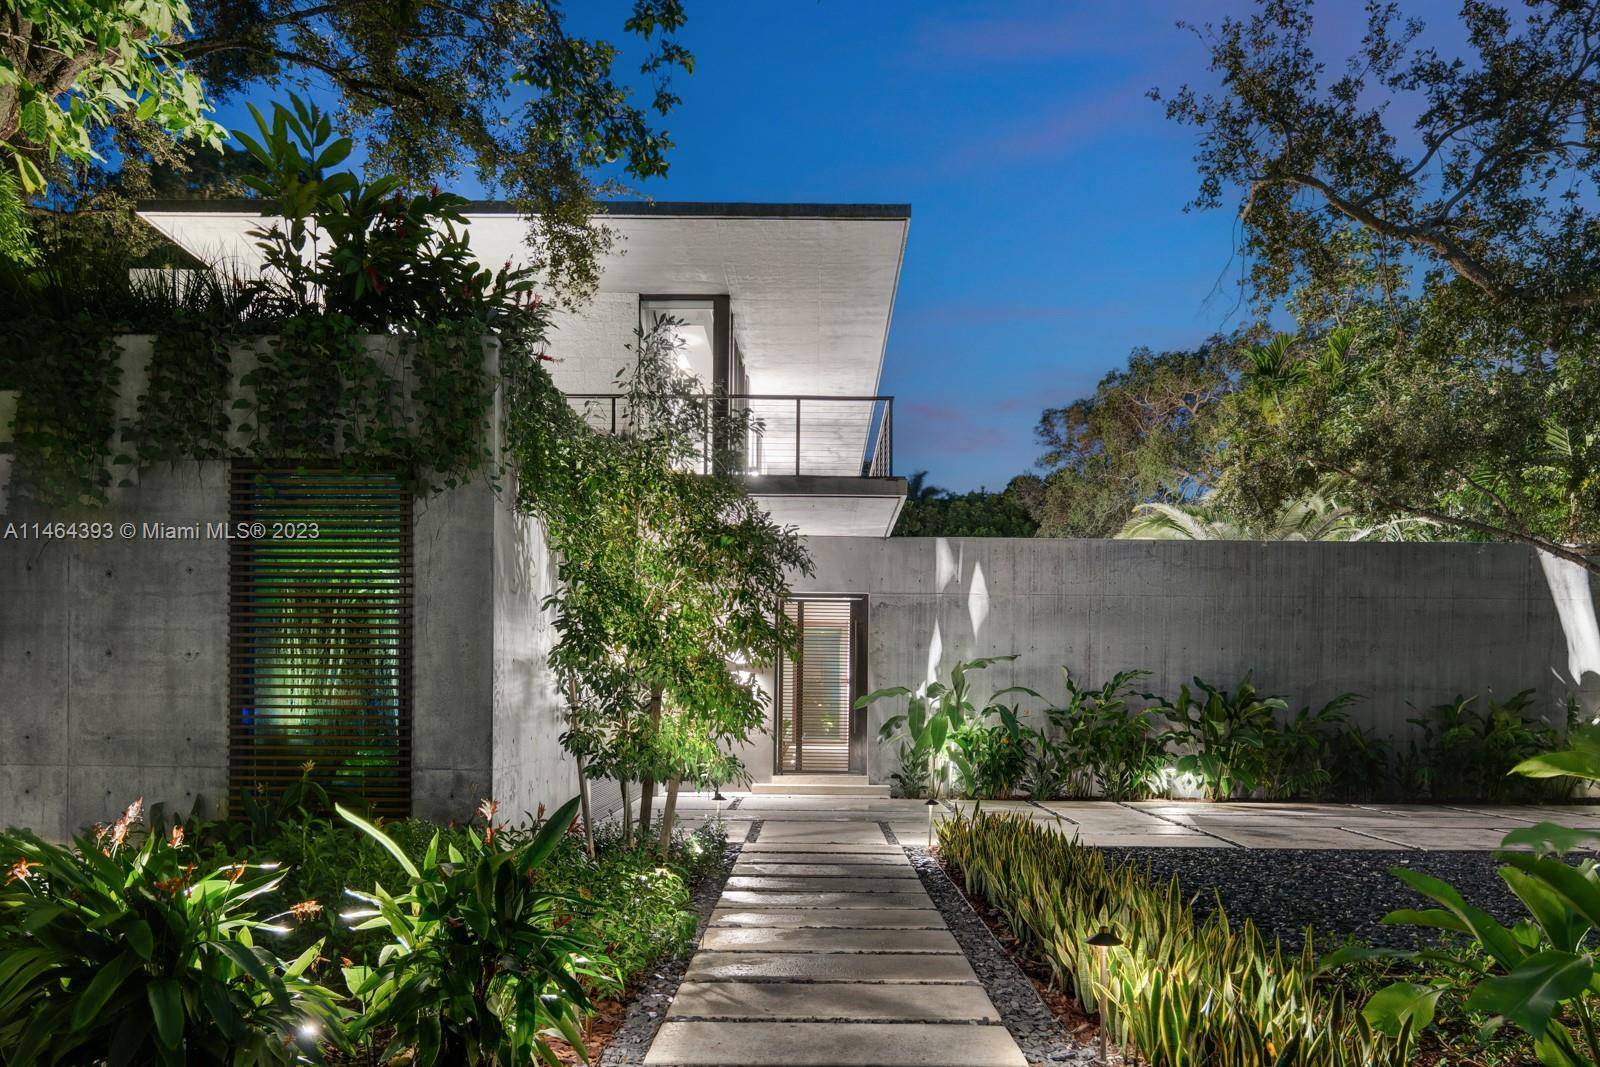 Welcome to a tropical paradise located in the exclusive Ye Little Wood gated enclave in Coconut Grove.